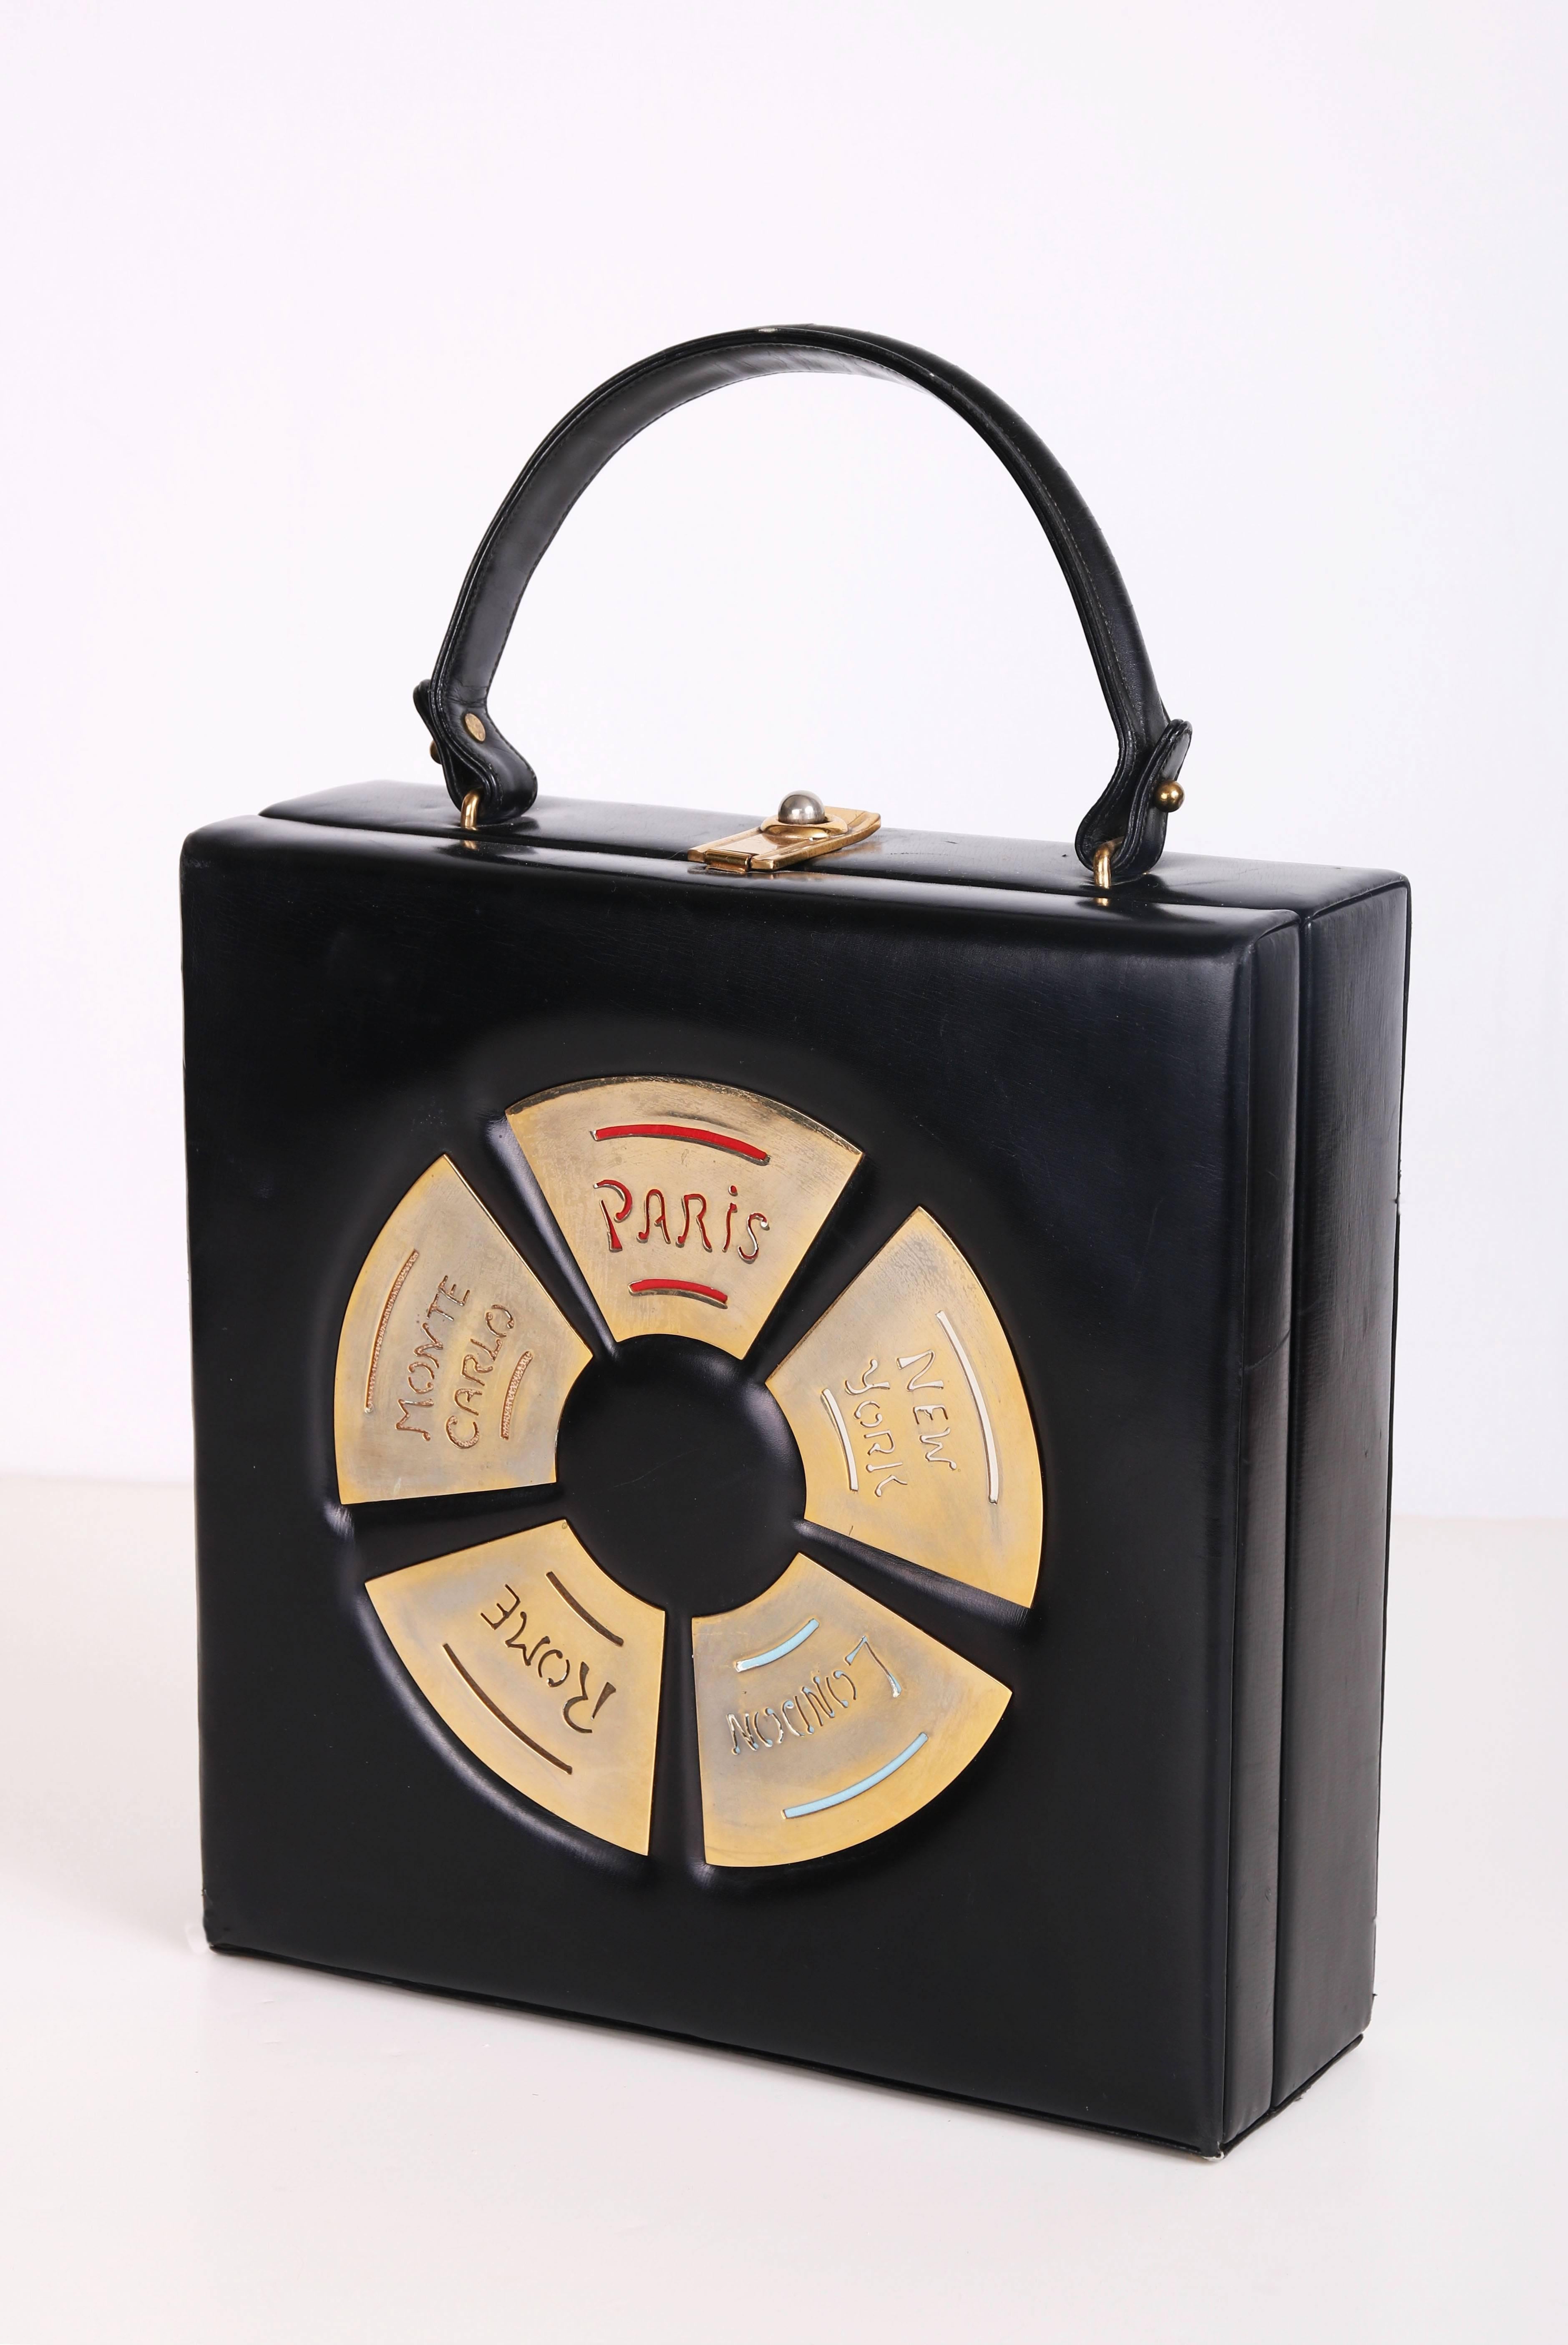 1960's Prestige black leather top-handle box handbag featuring destination city names - Paris, New York, London, Rome, and Monte Carlo in a variety of colors in gold-toned metal plaques. Metal clasp closure. Lined in a cream colored leather with